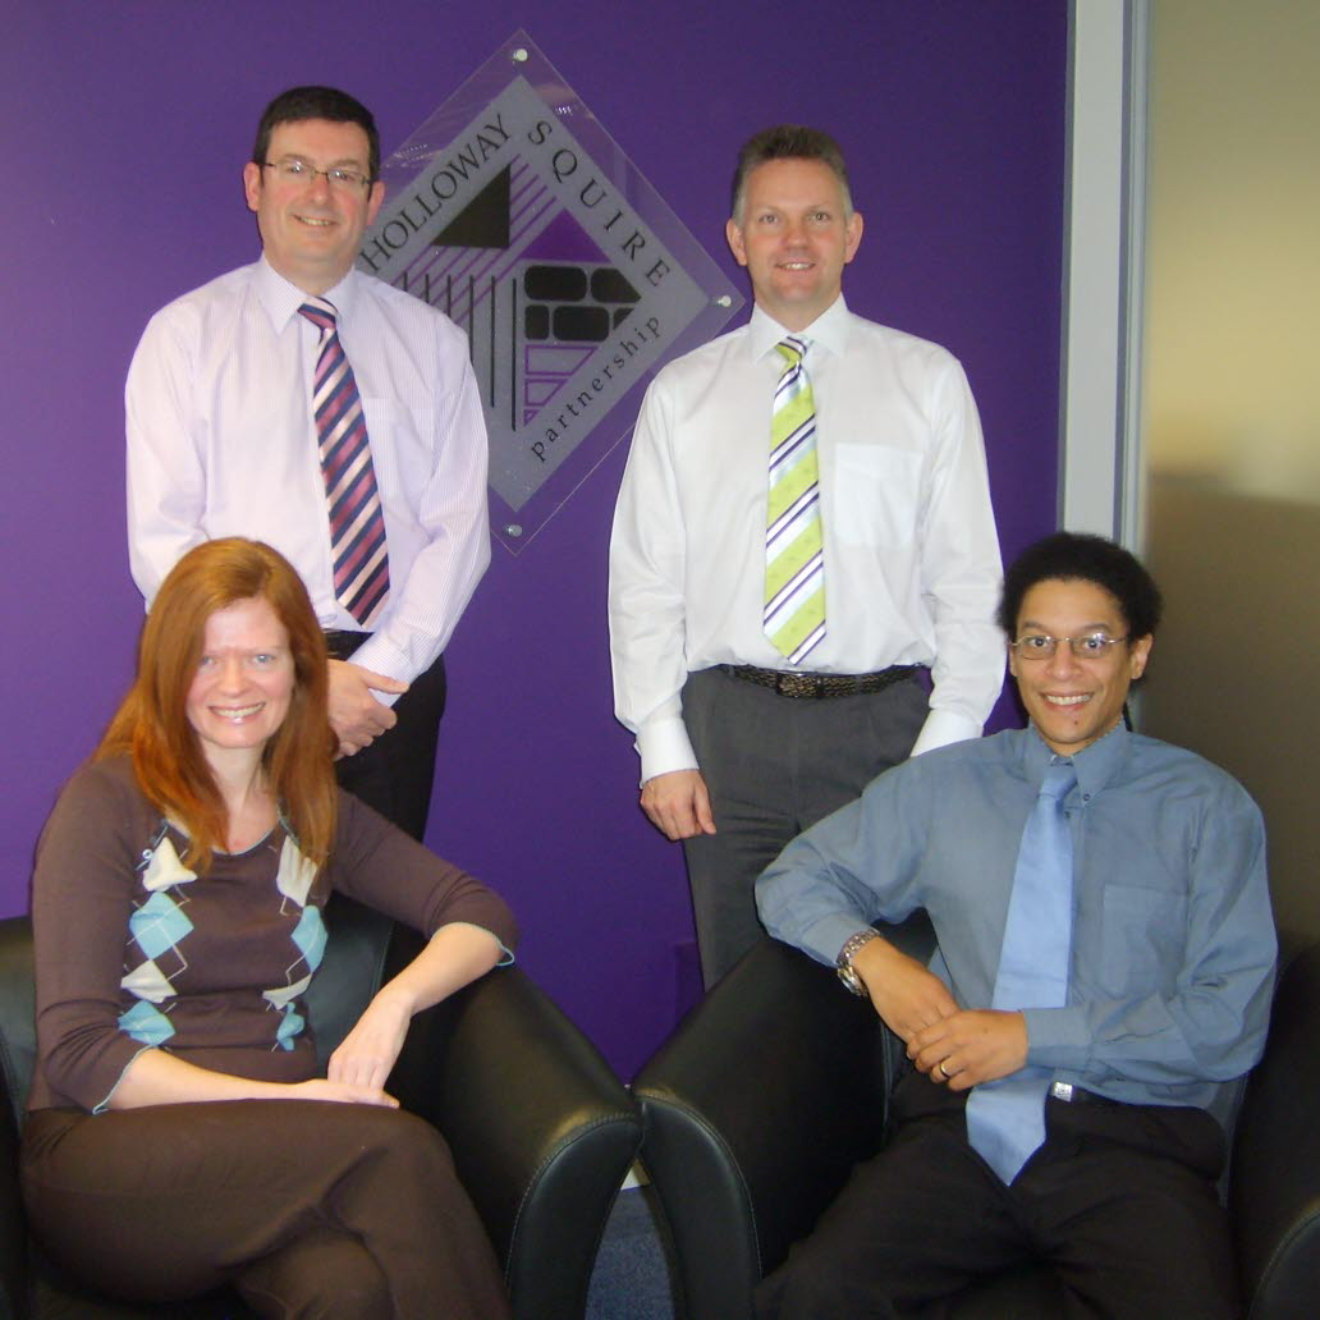 Picture of Holloway squire partnership staff